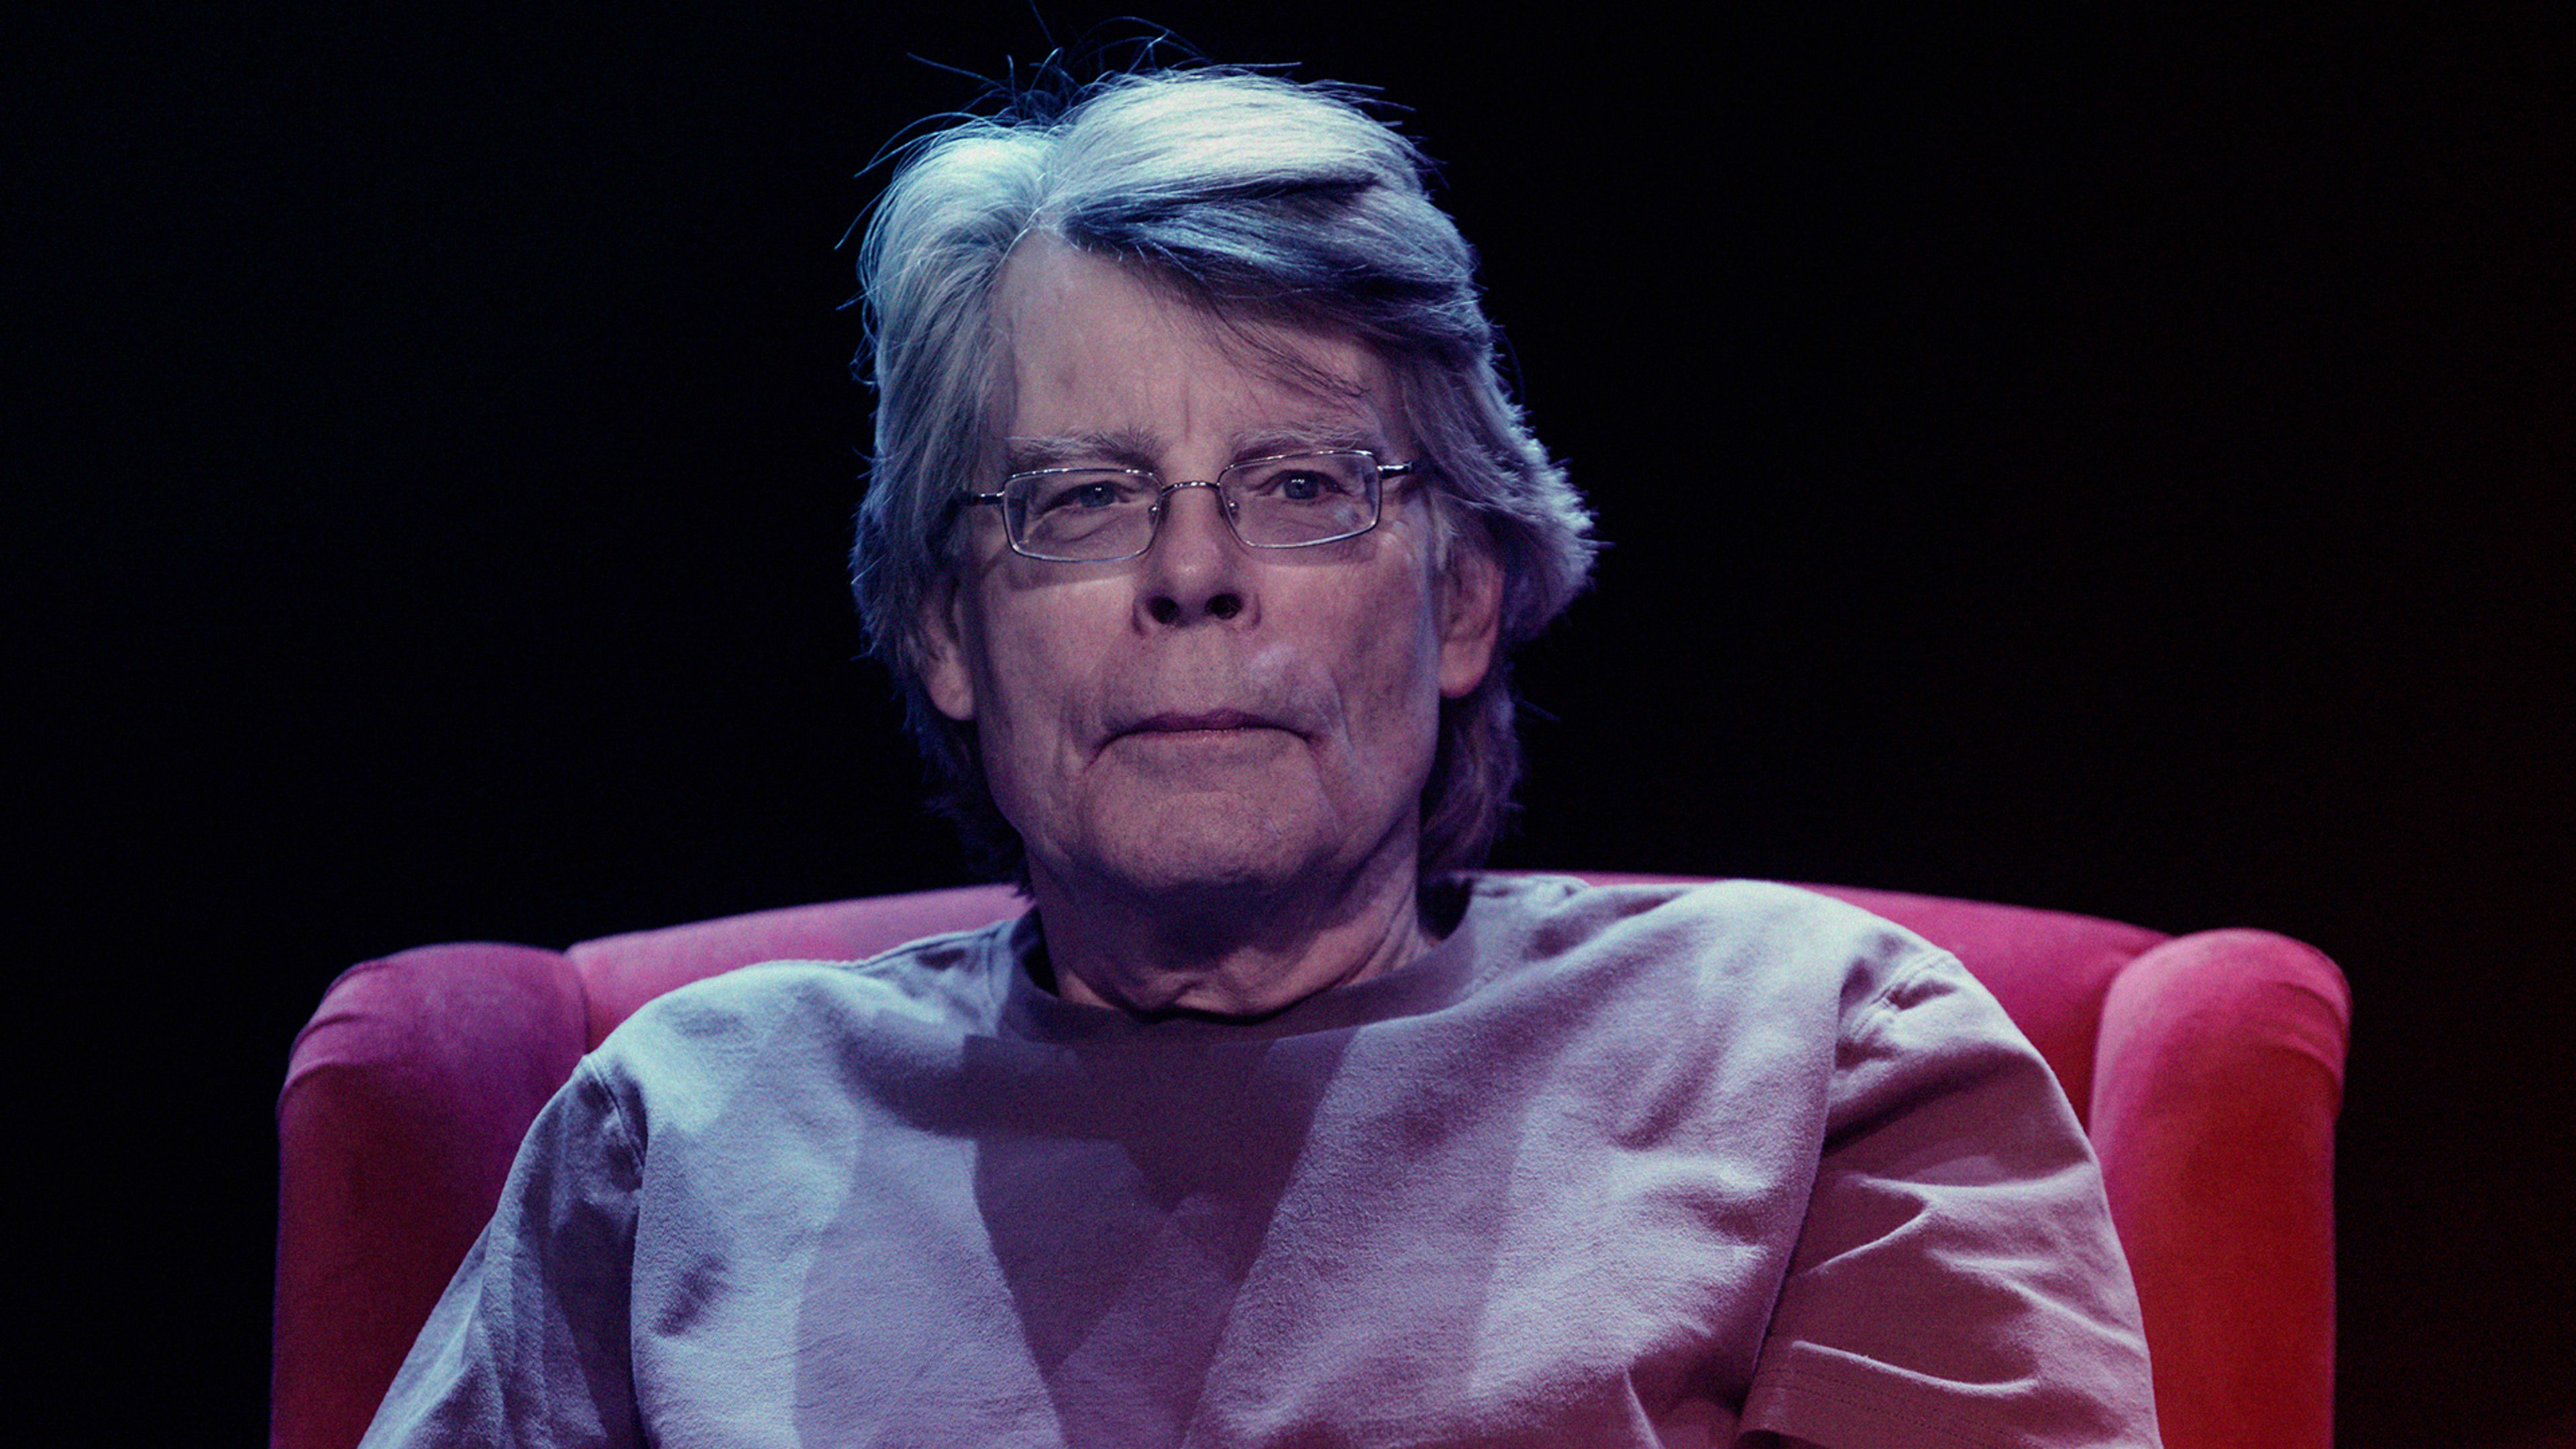 Stephen King sold another book to Hollywood this week. Are there any left that aren’t movies or TV series?